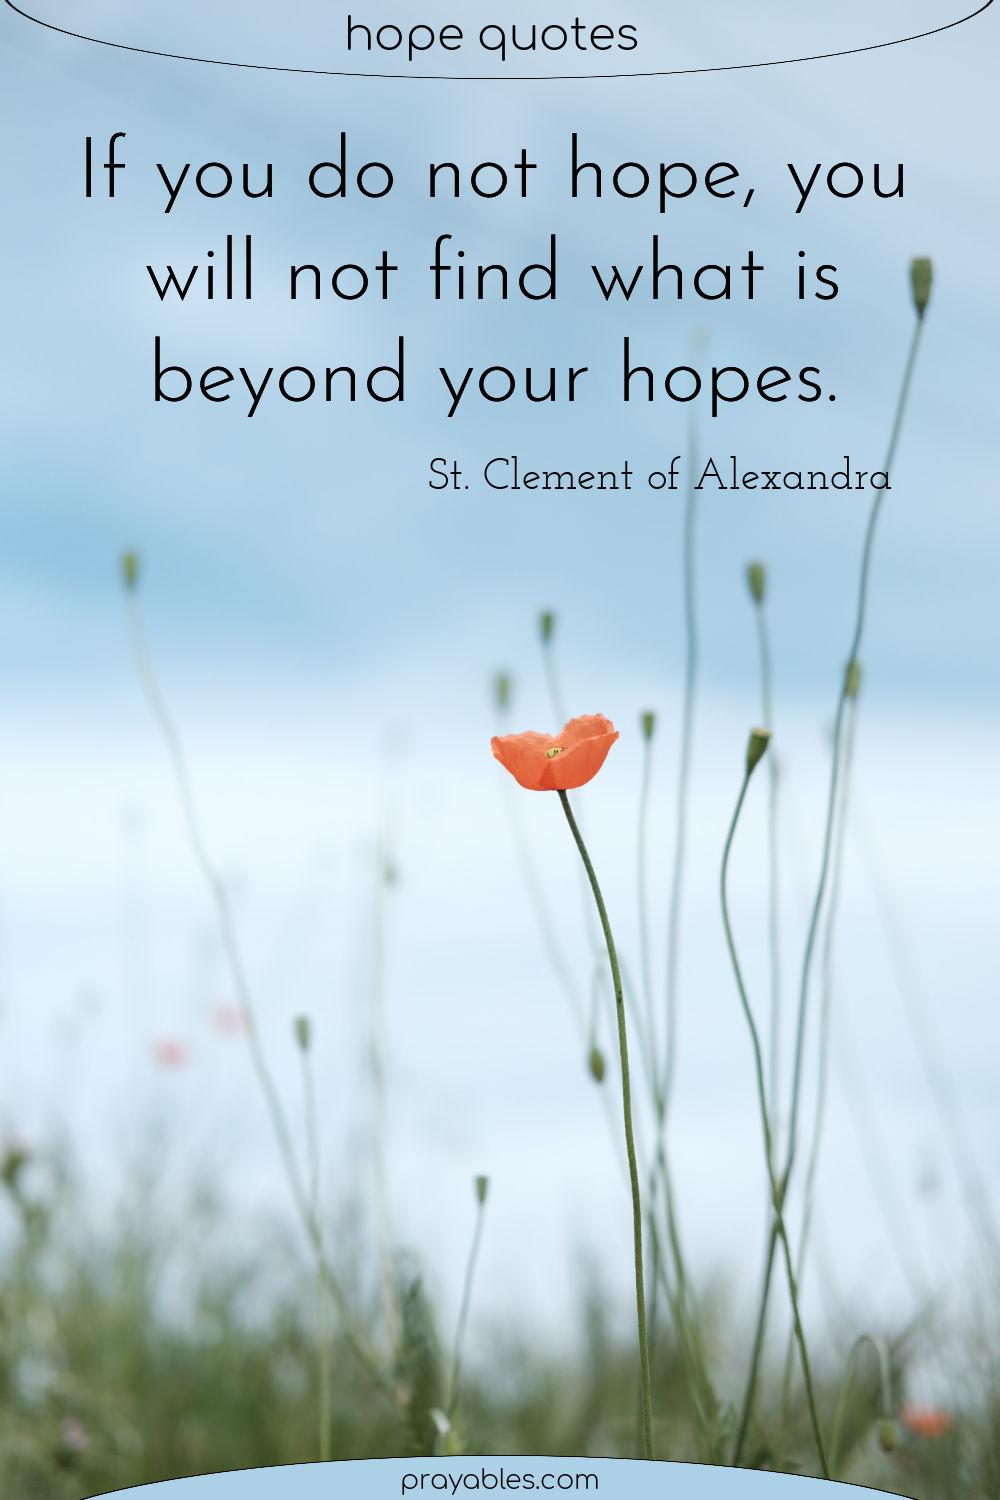 If you do not hope, you will not find what is beyond your hopes. St. Clement of Alexandra